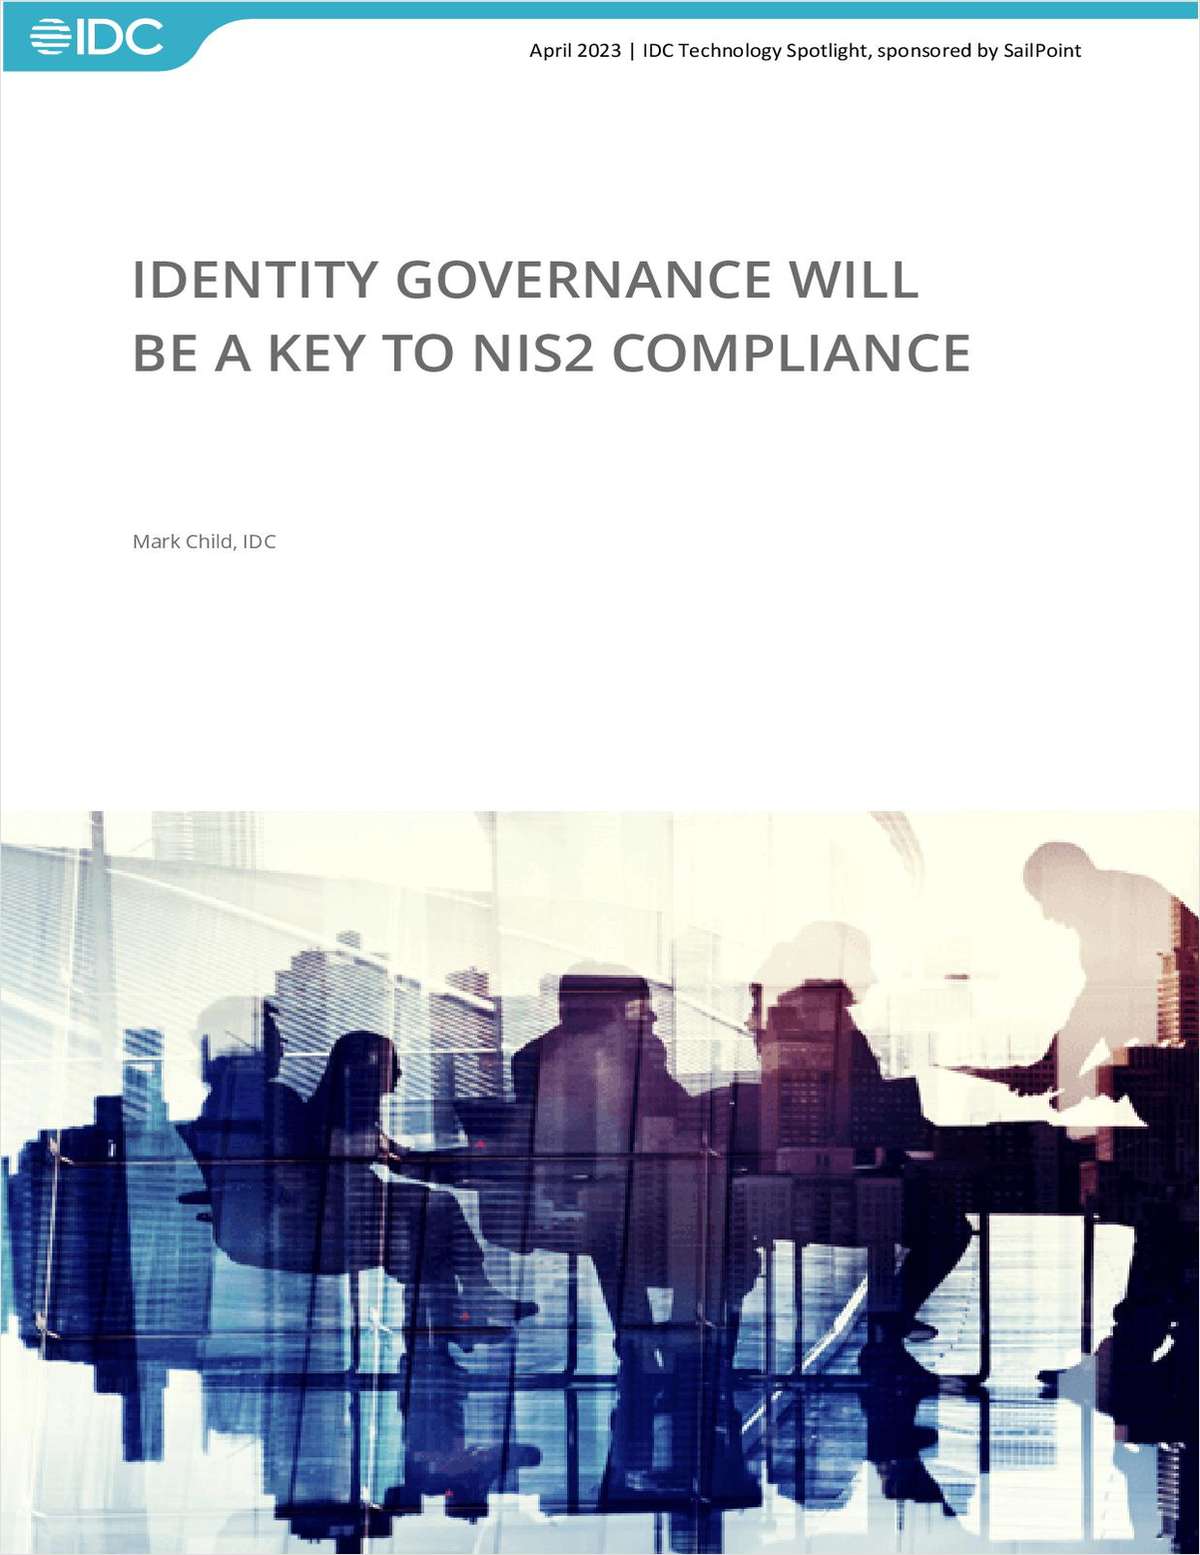 Identity governance will be key to NIS2 compliance